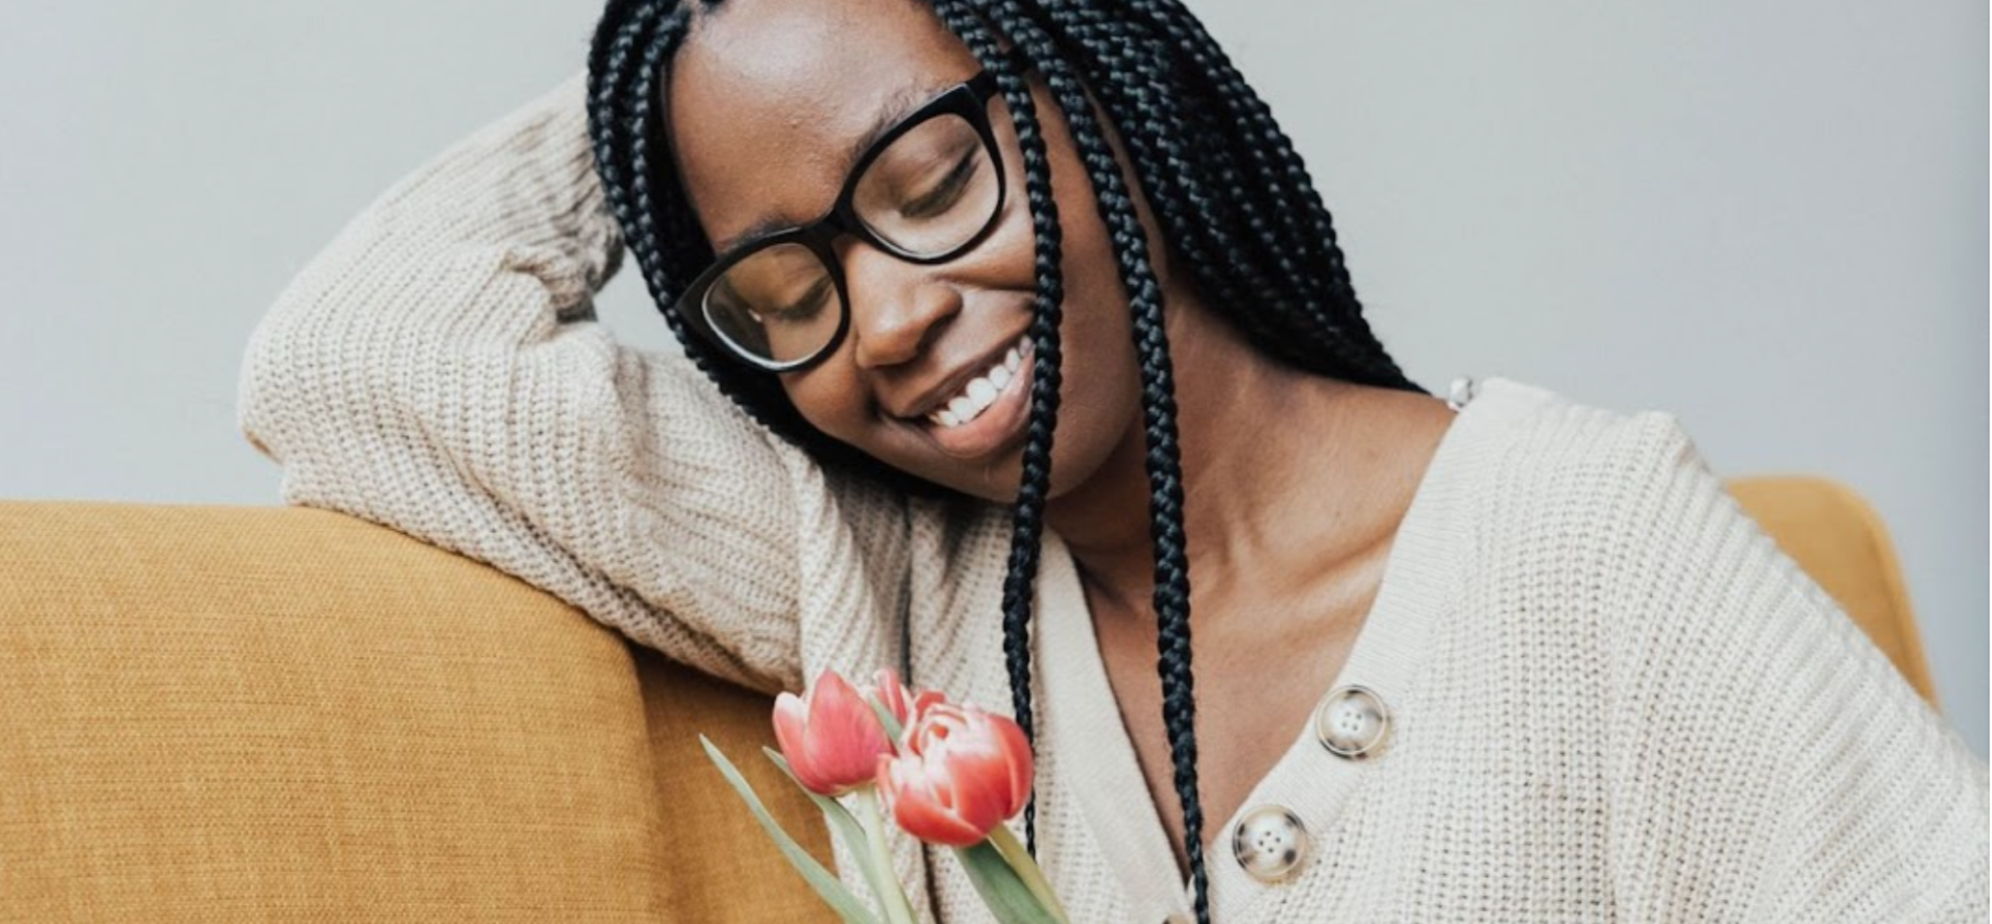 Woman wearing glasses with closed eyes, smiling and holding tulips